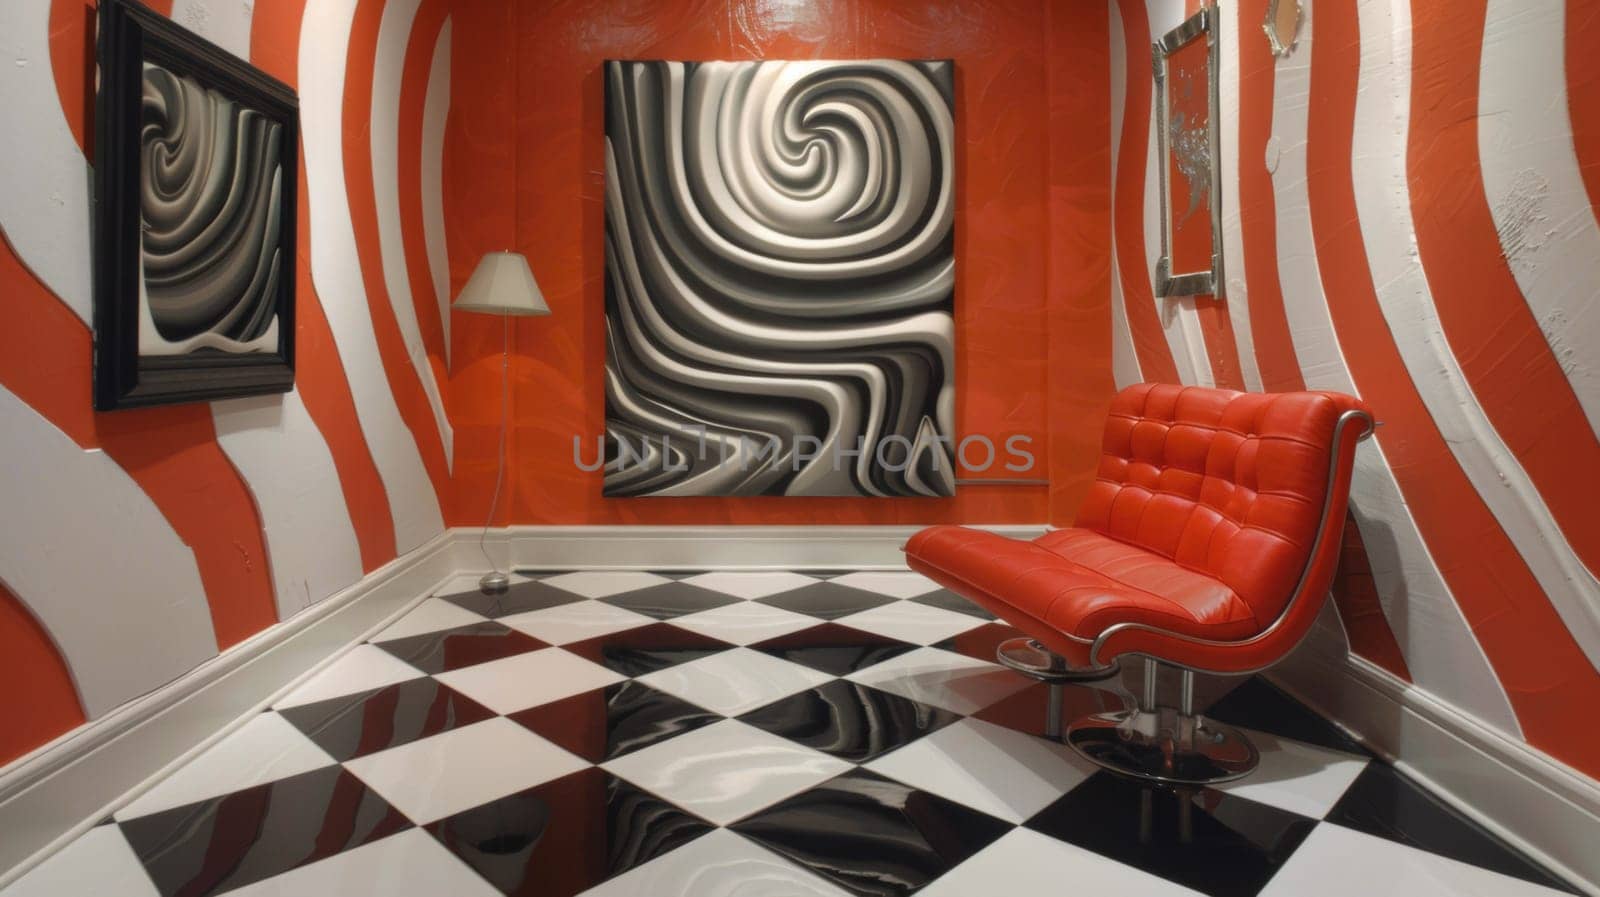 A red chair in a room with black and white checkered floor